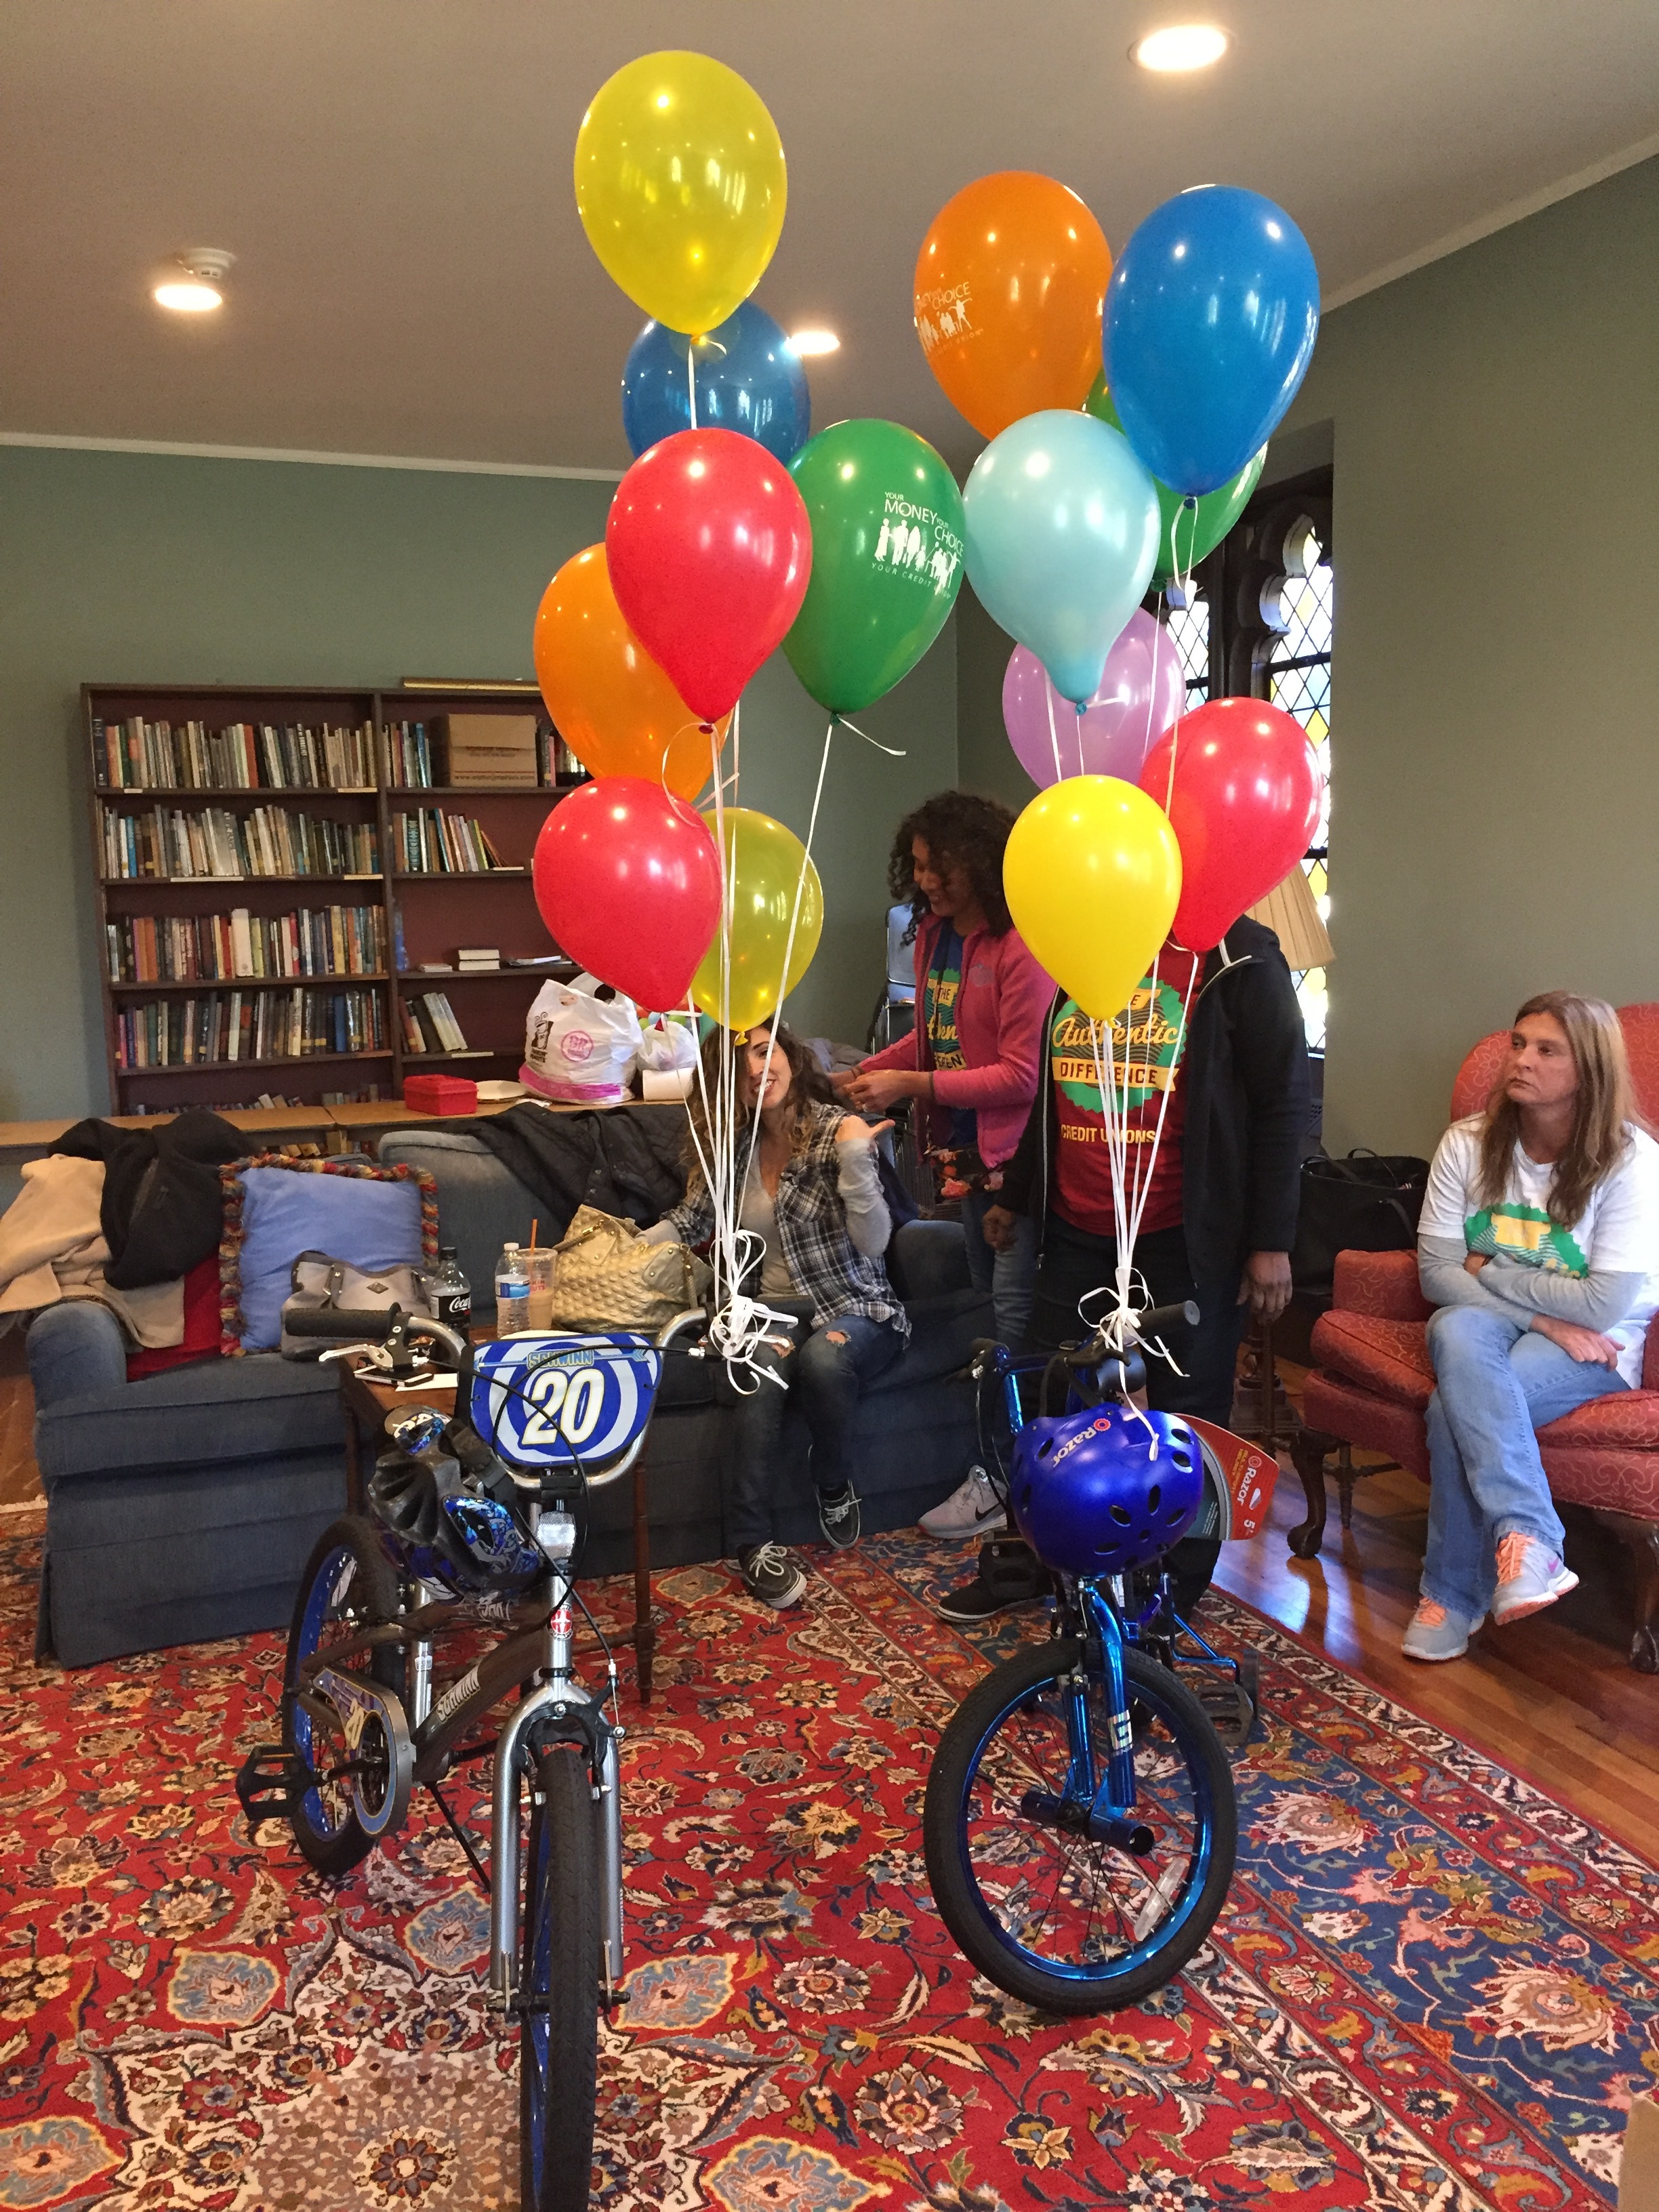 Balloons with bicycles